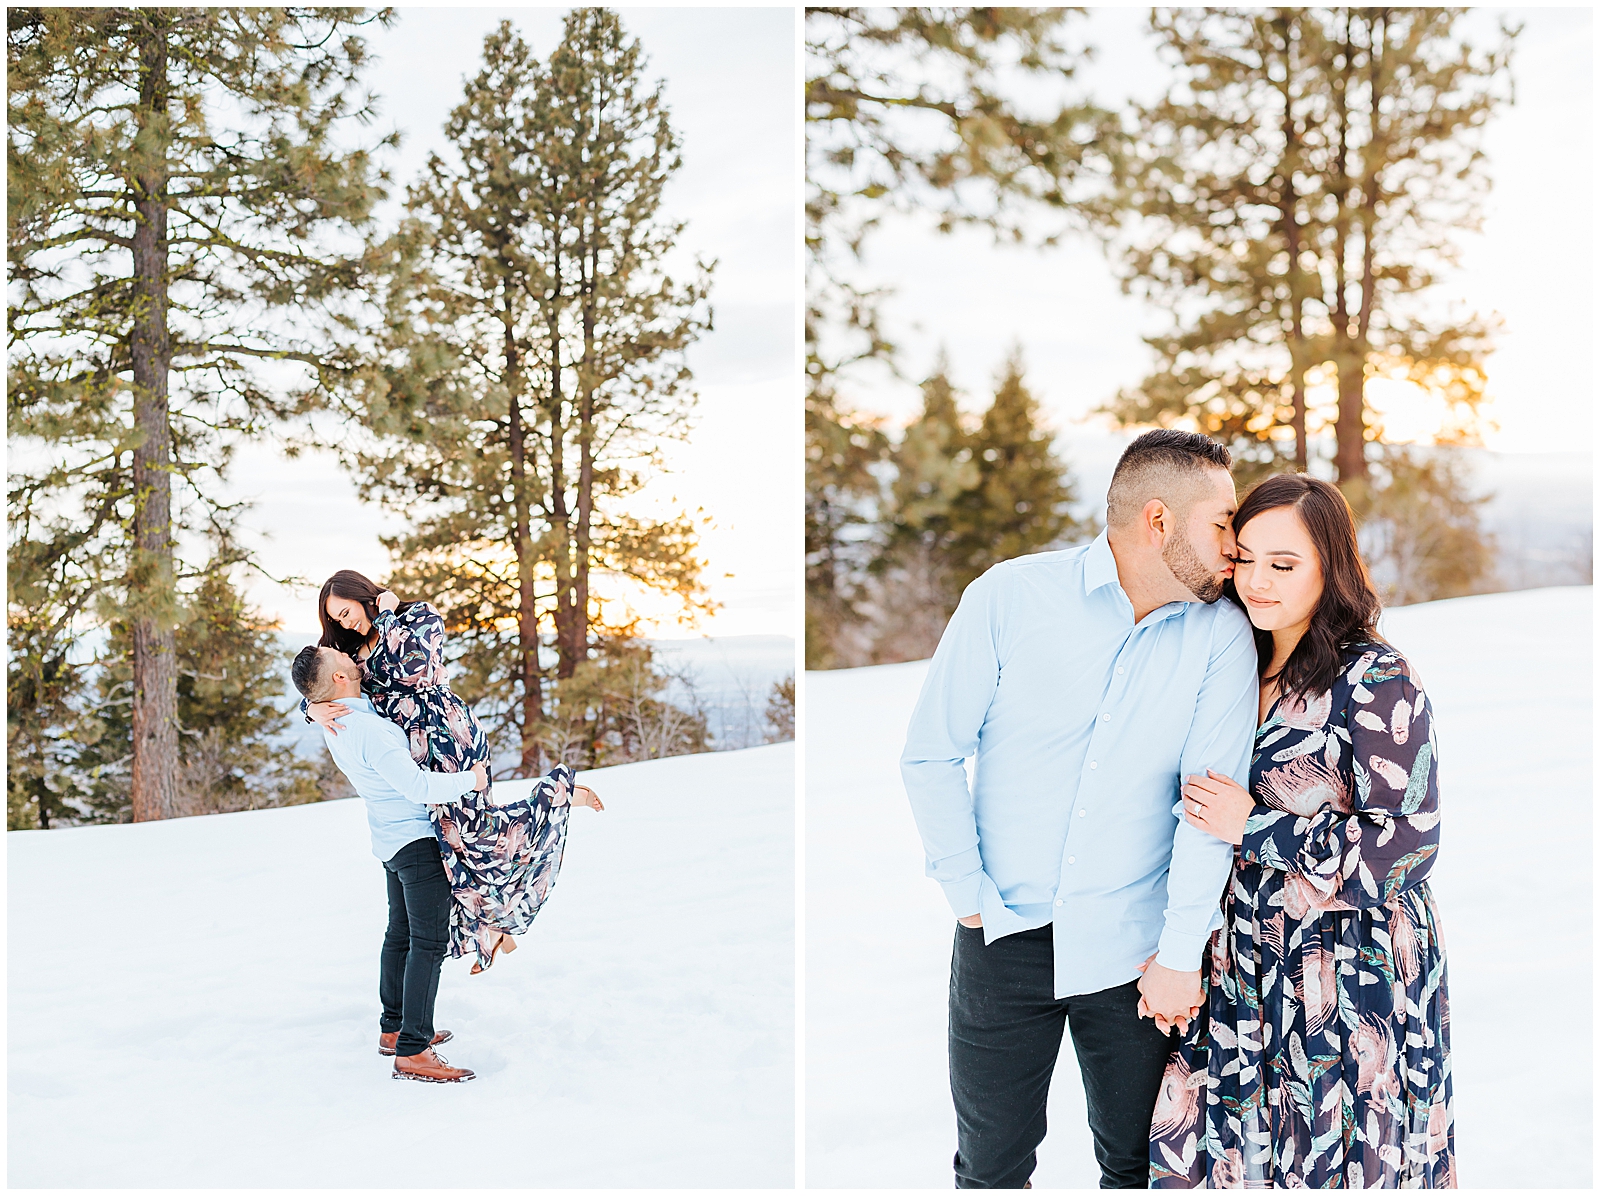 Bogus Basin Winter Engagement Session in the Snow